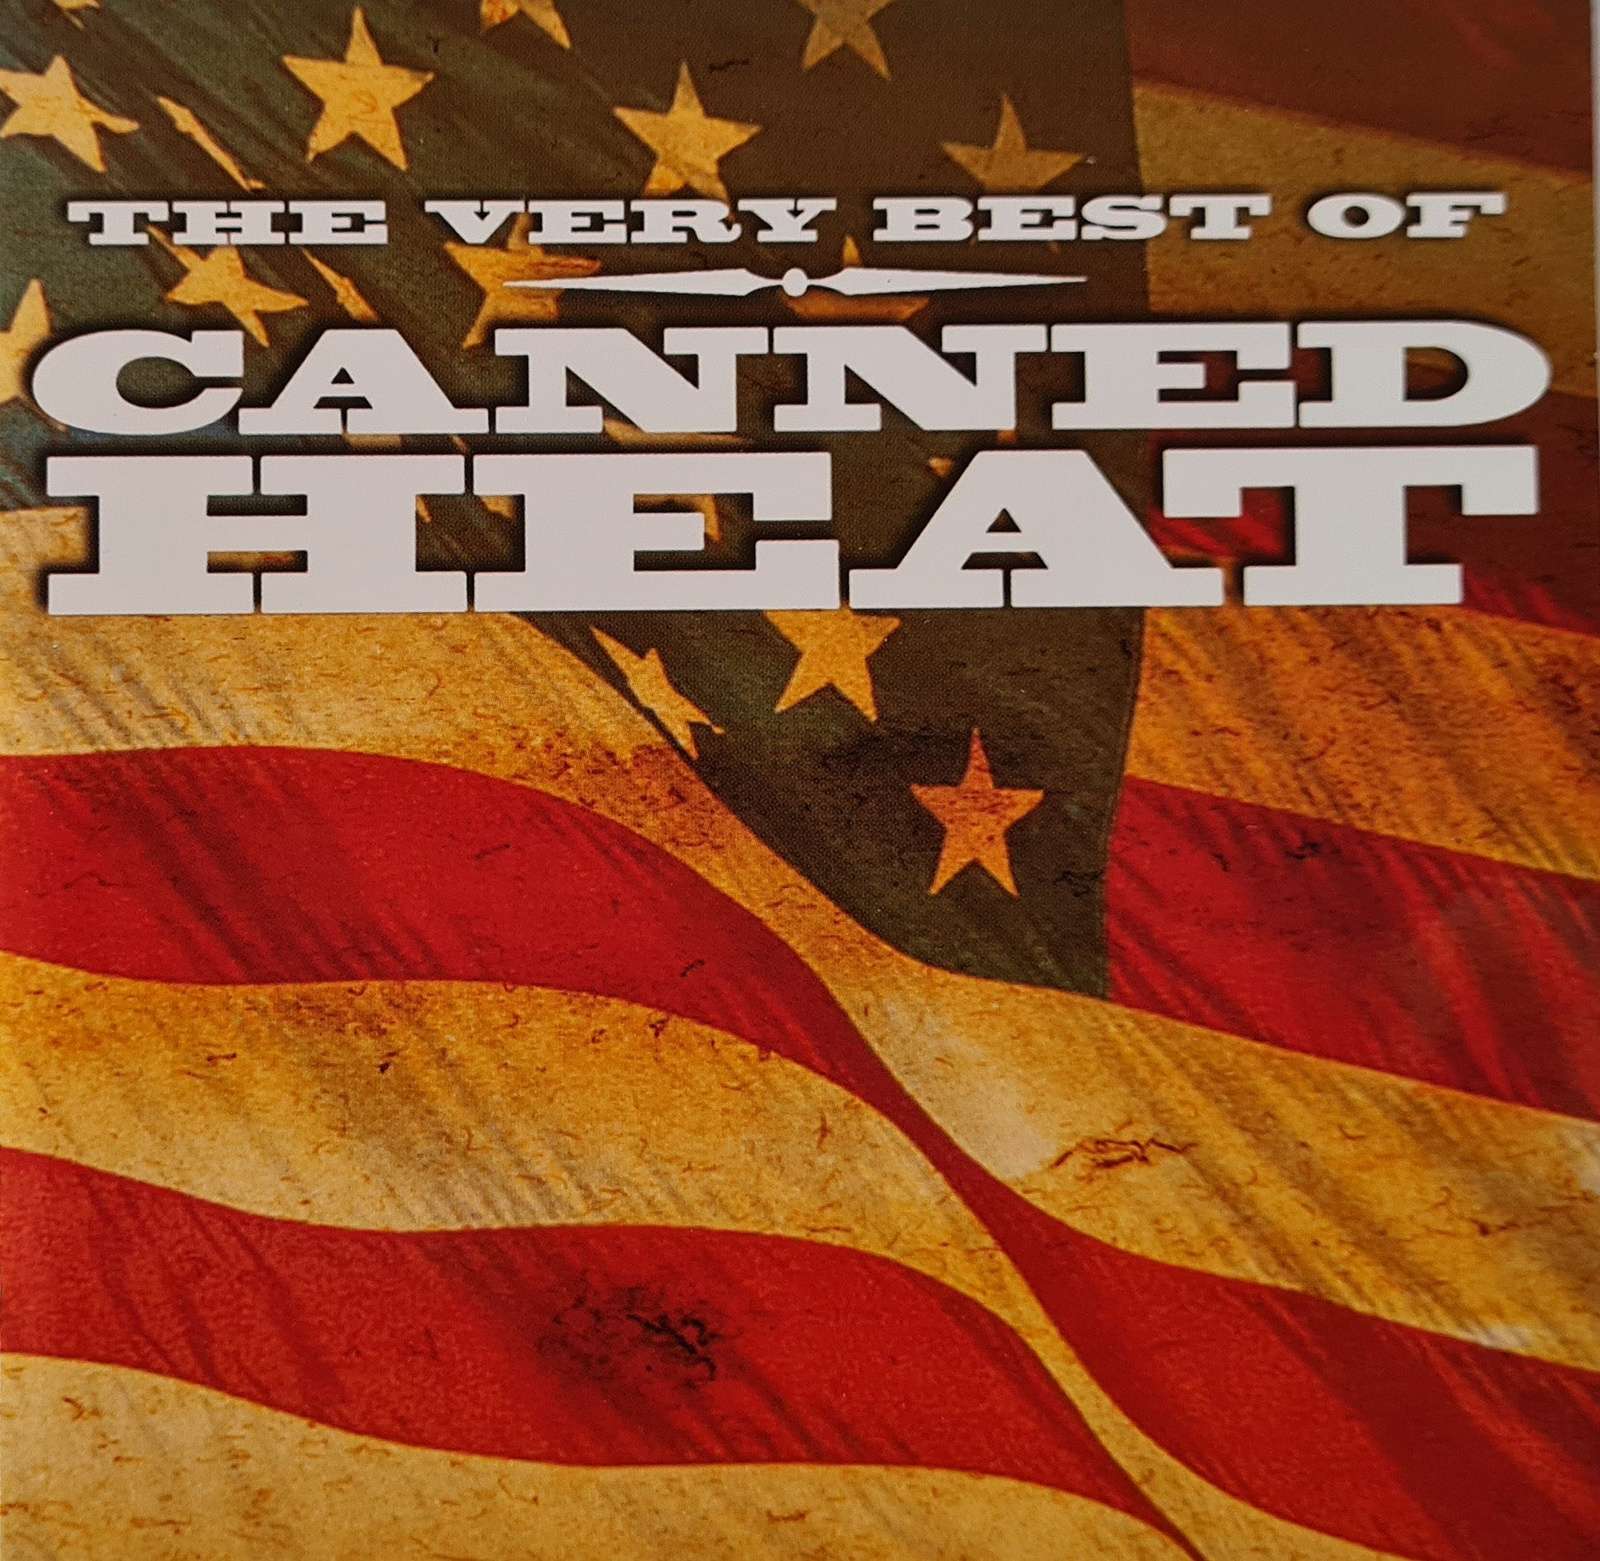 Canned Heat - The Very Best of (CD)